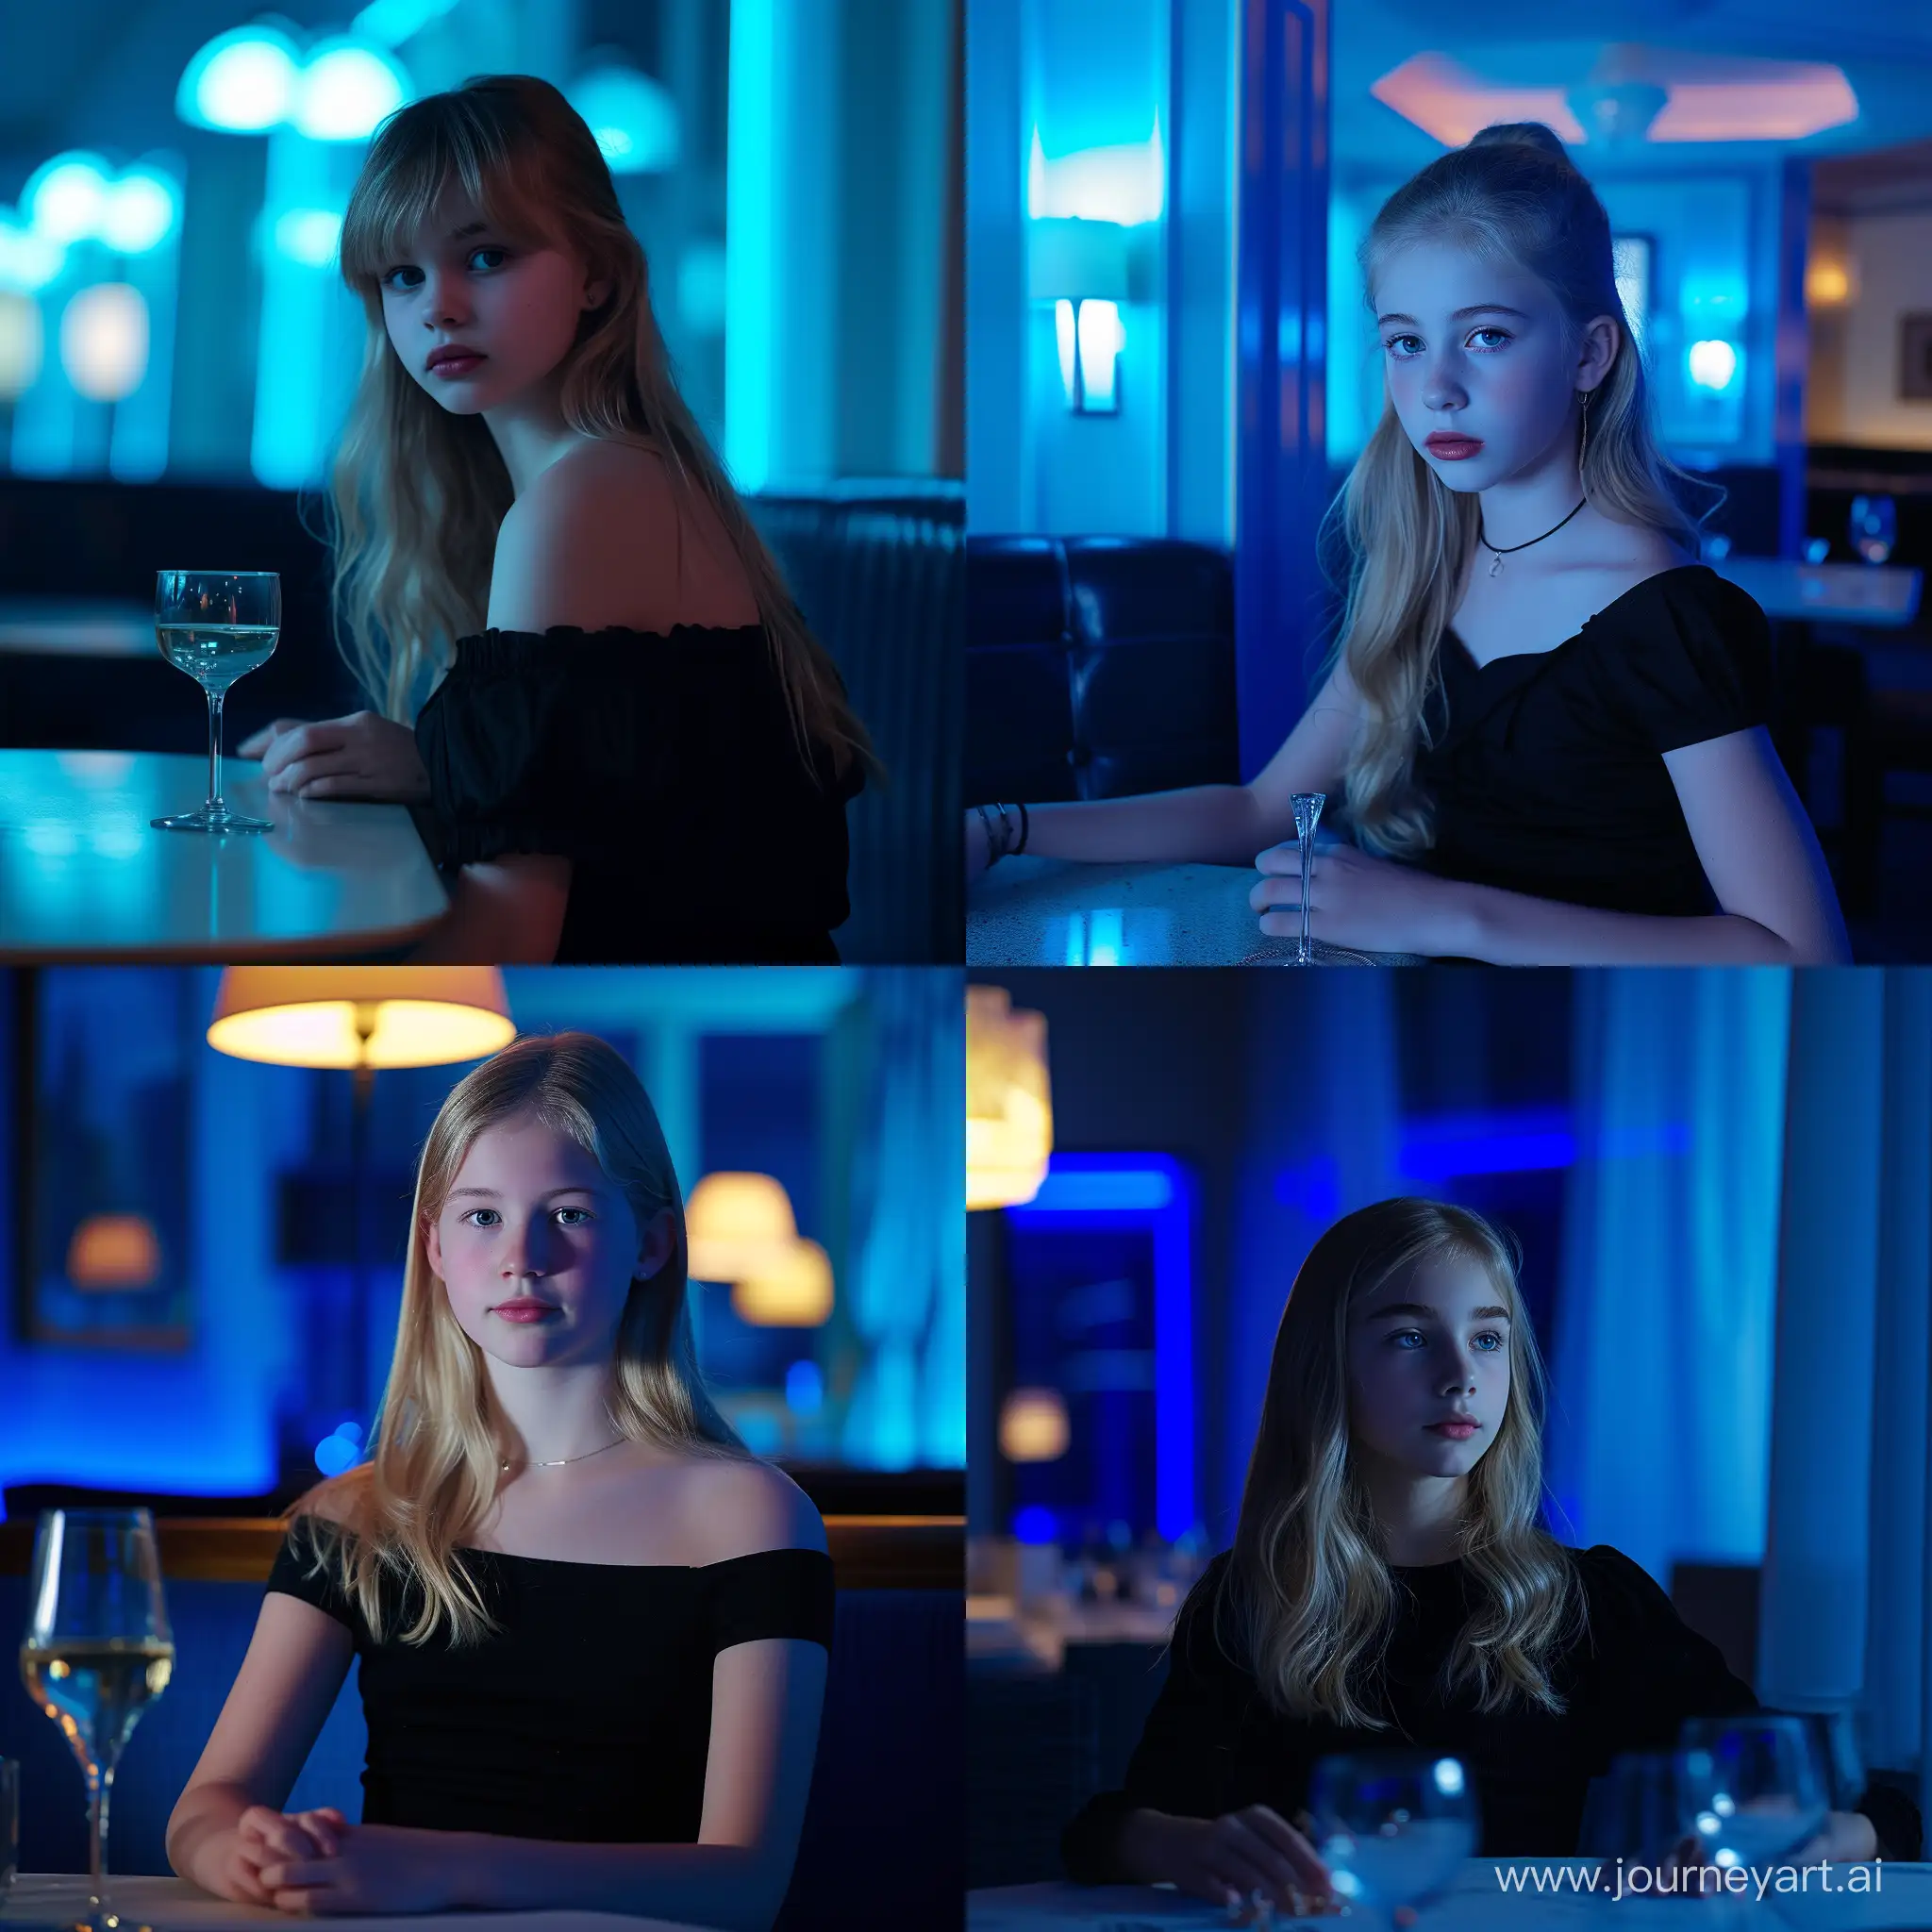 a young girl 18 years old, blonde, in a black top sits at a table with a wine glass in a room with blue lighting.